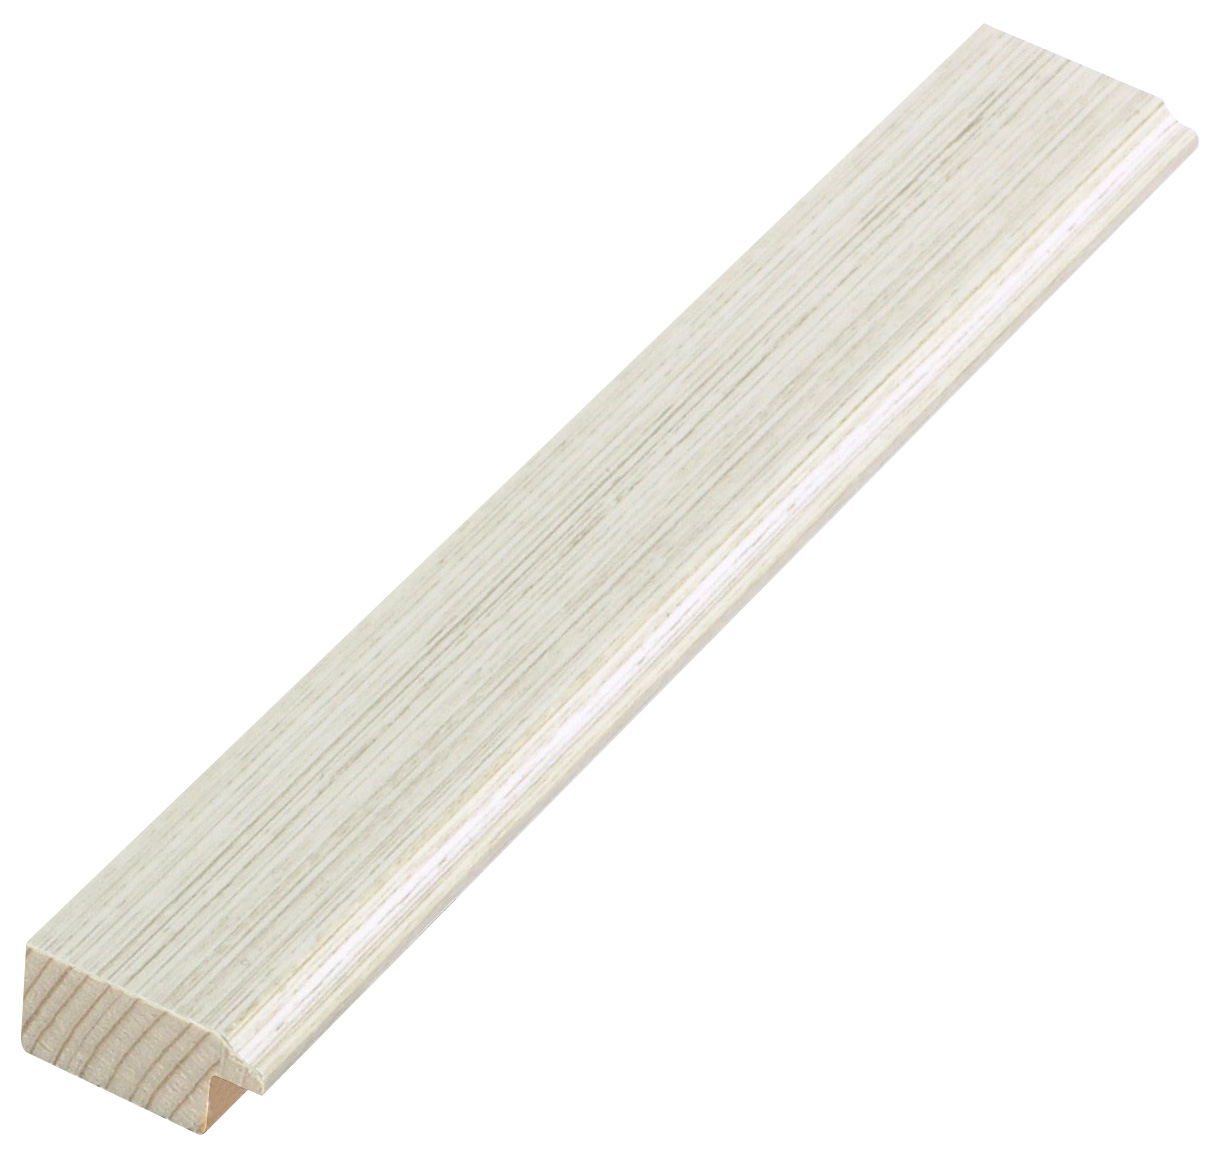 Liner finger-jointed pine 28mm - Cream, wired texture